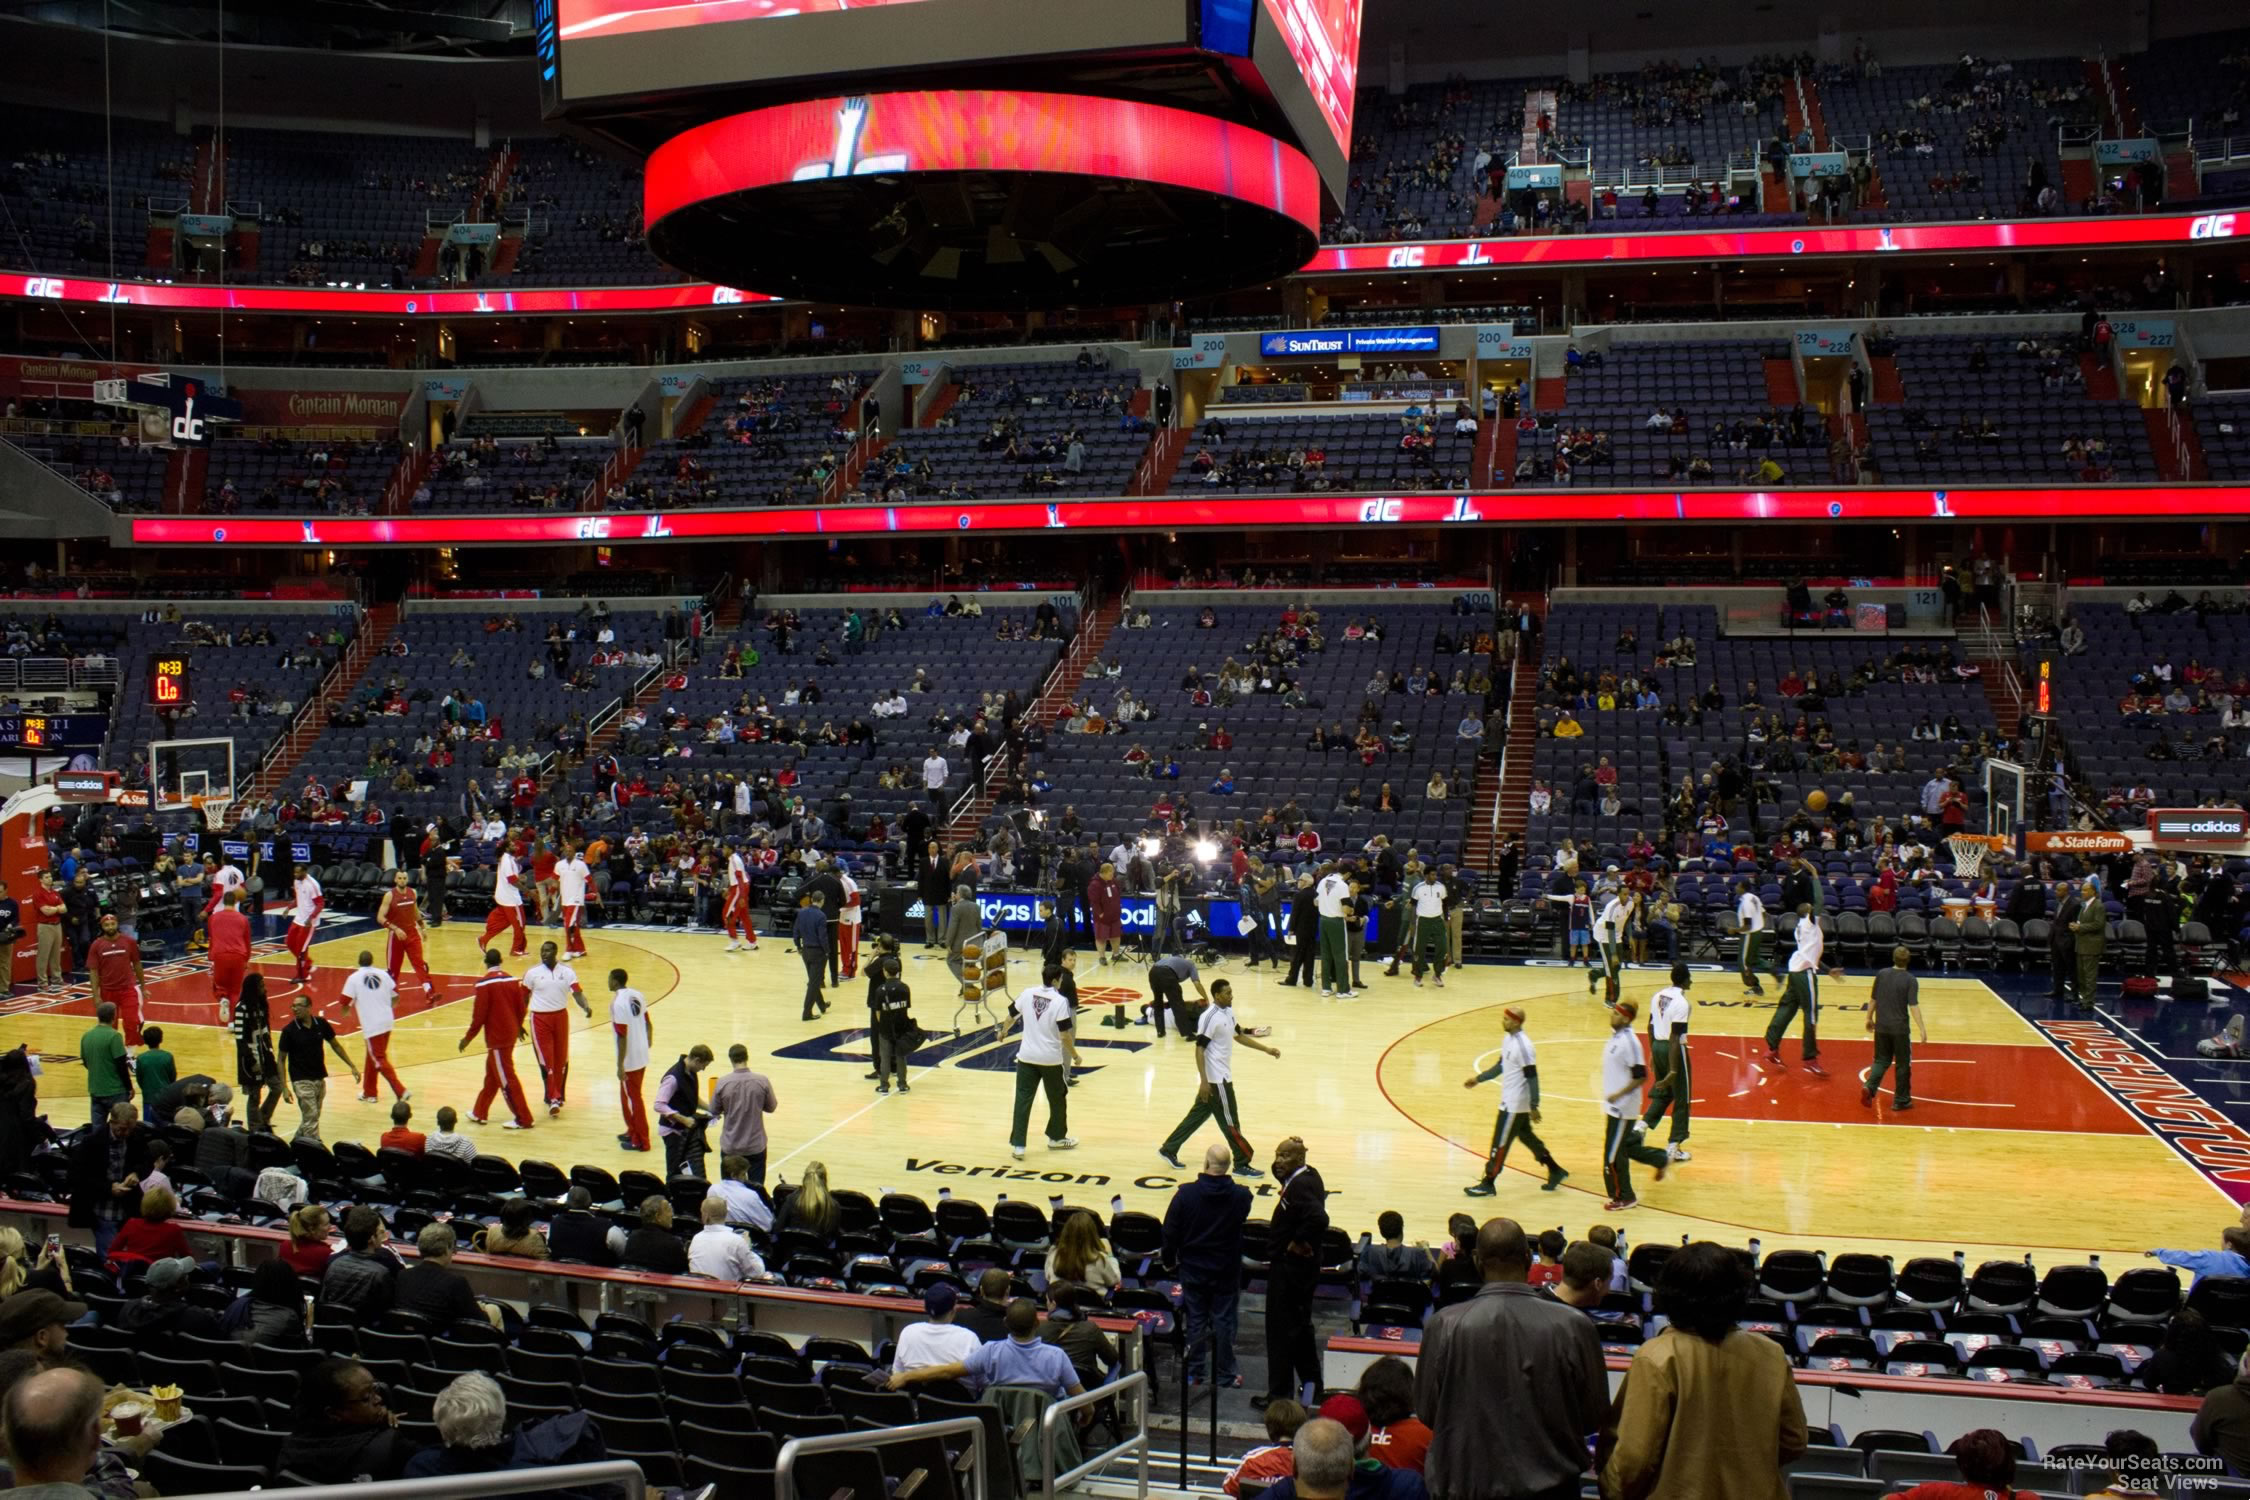 Section 112 at Capital One Arena Washington Wizards